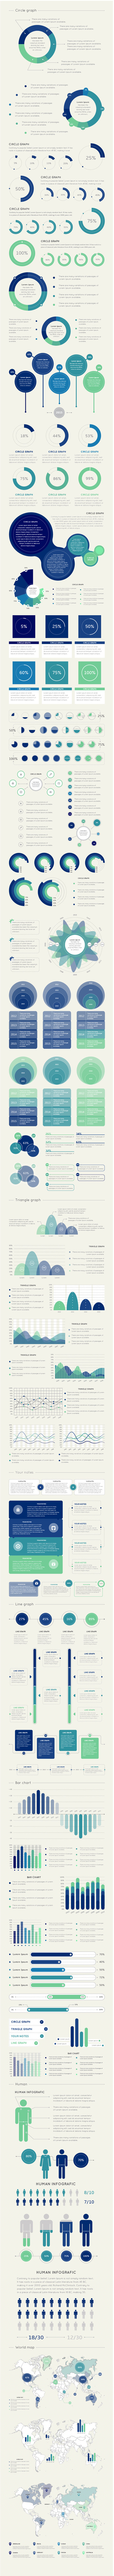 Infographic Elements Template - Vector Pack